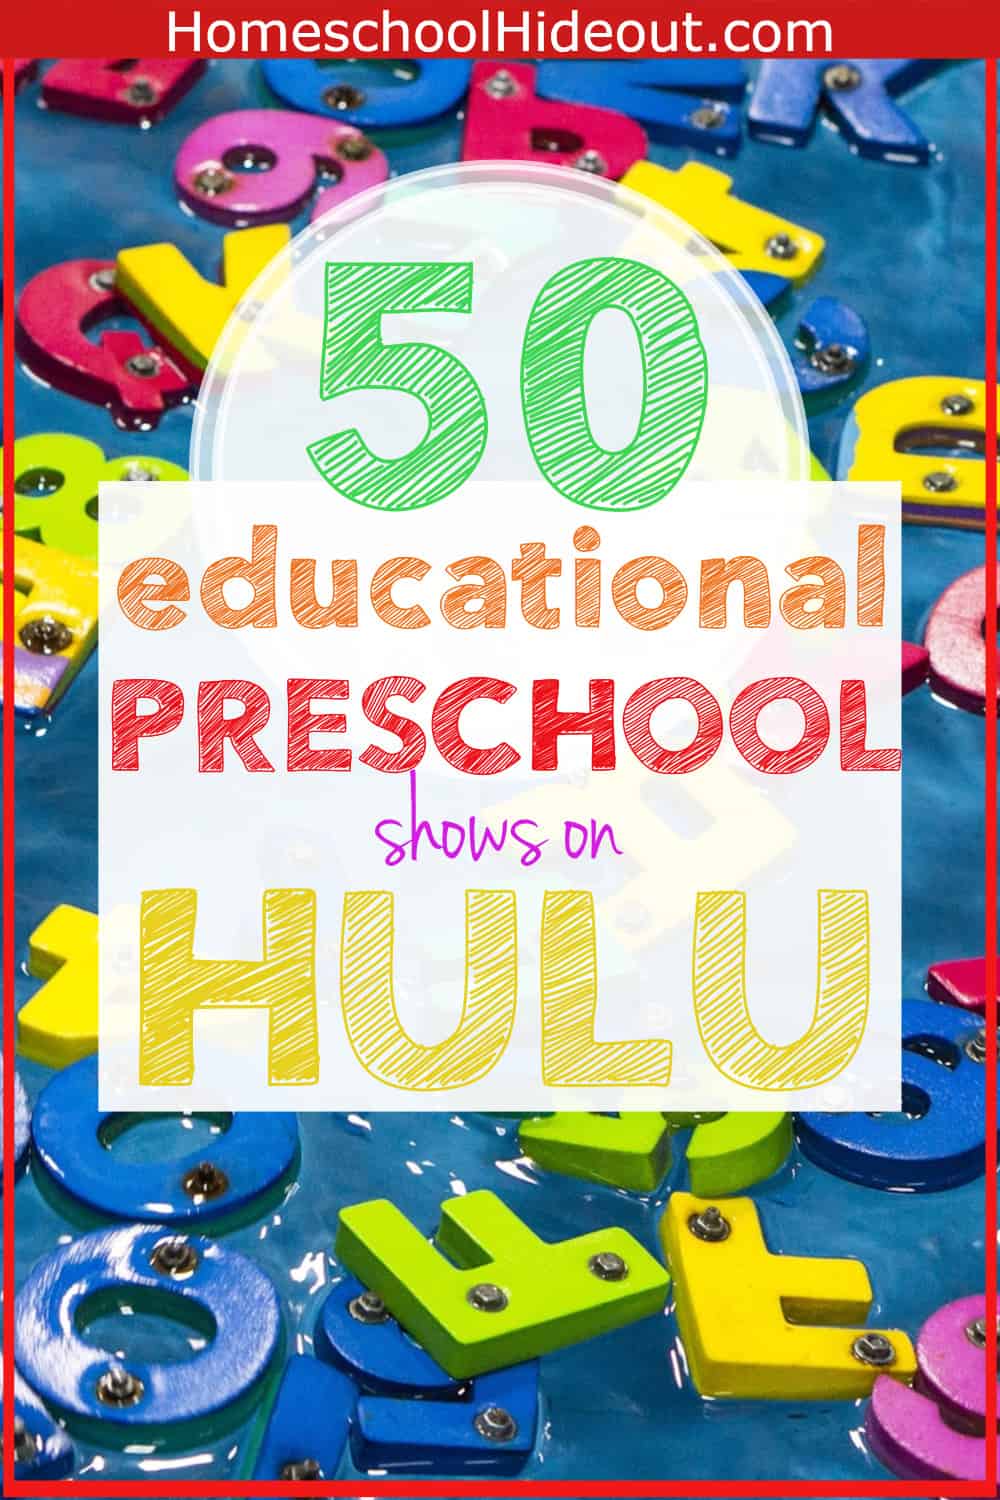 This list of 50 educational preschool shows on Hulu is the BEST I've seen! I'm adding these to my watch list to make my life a little easier. #learningathome #preschool #prek #homeschool #totschooling